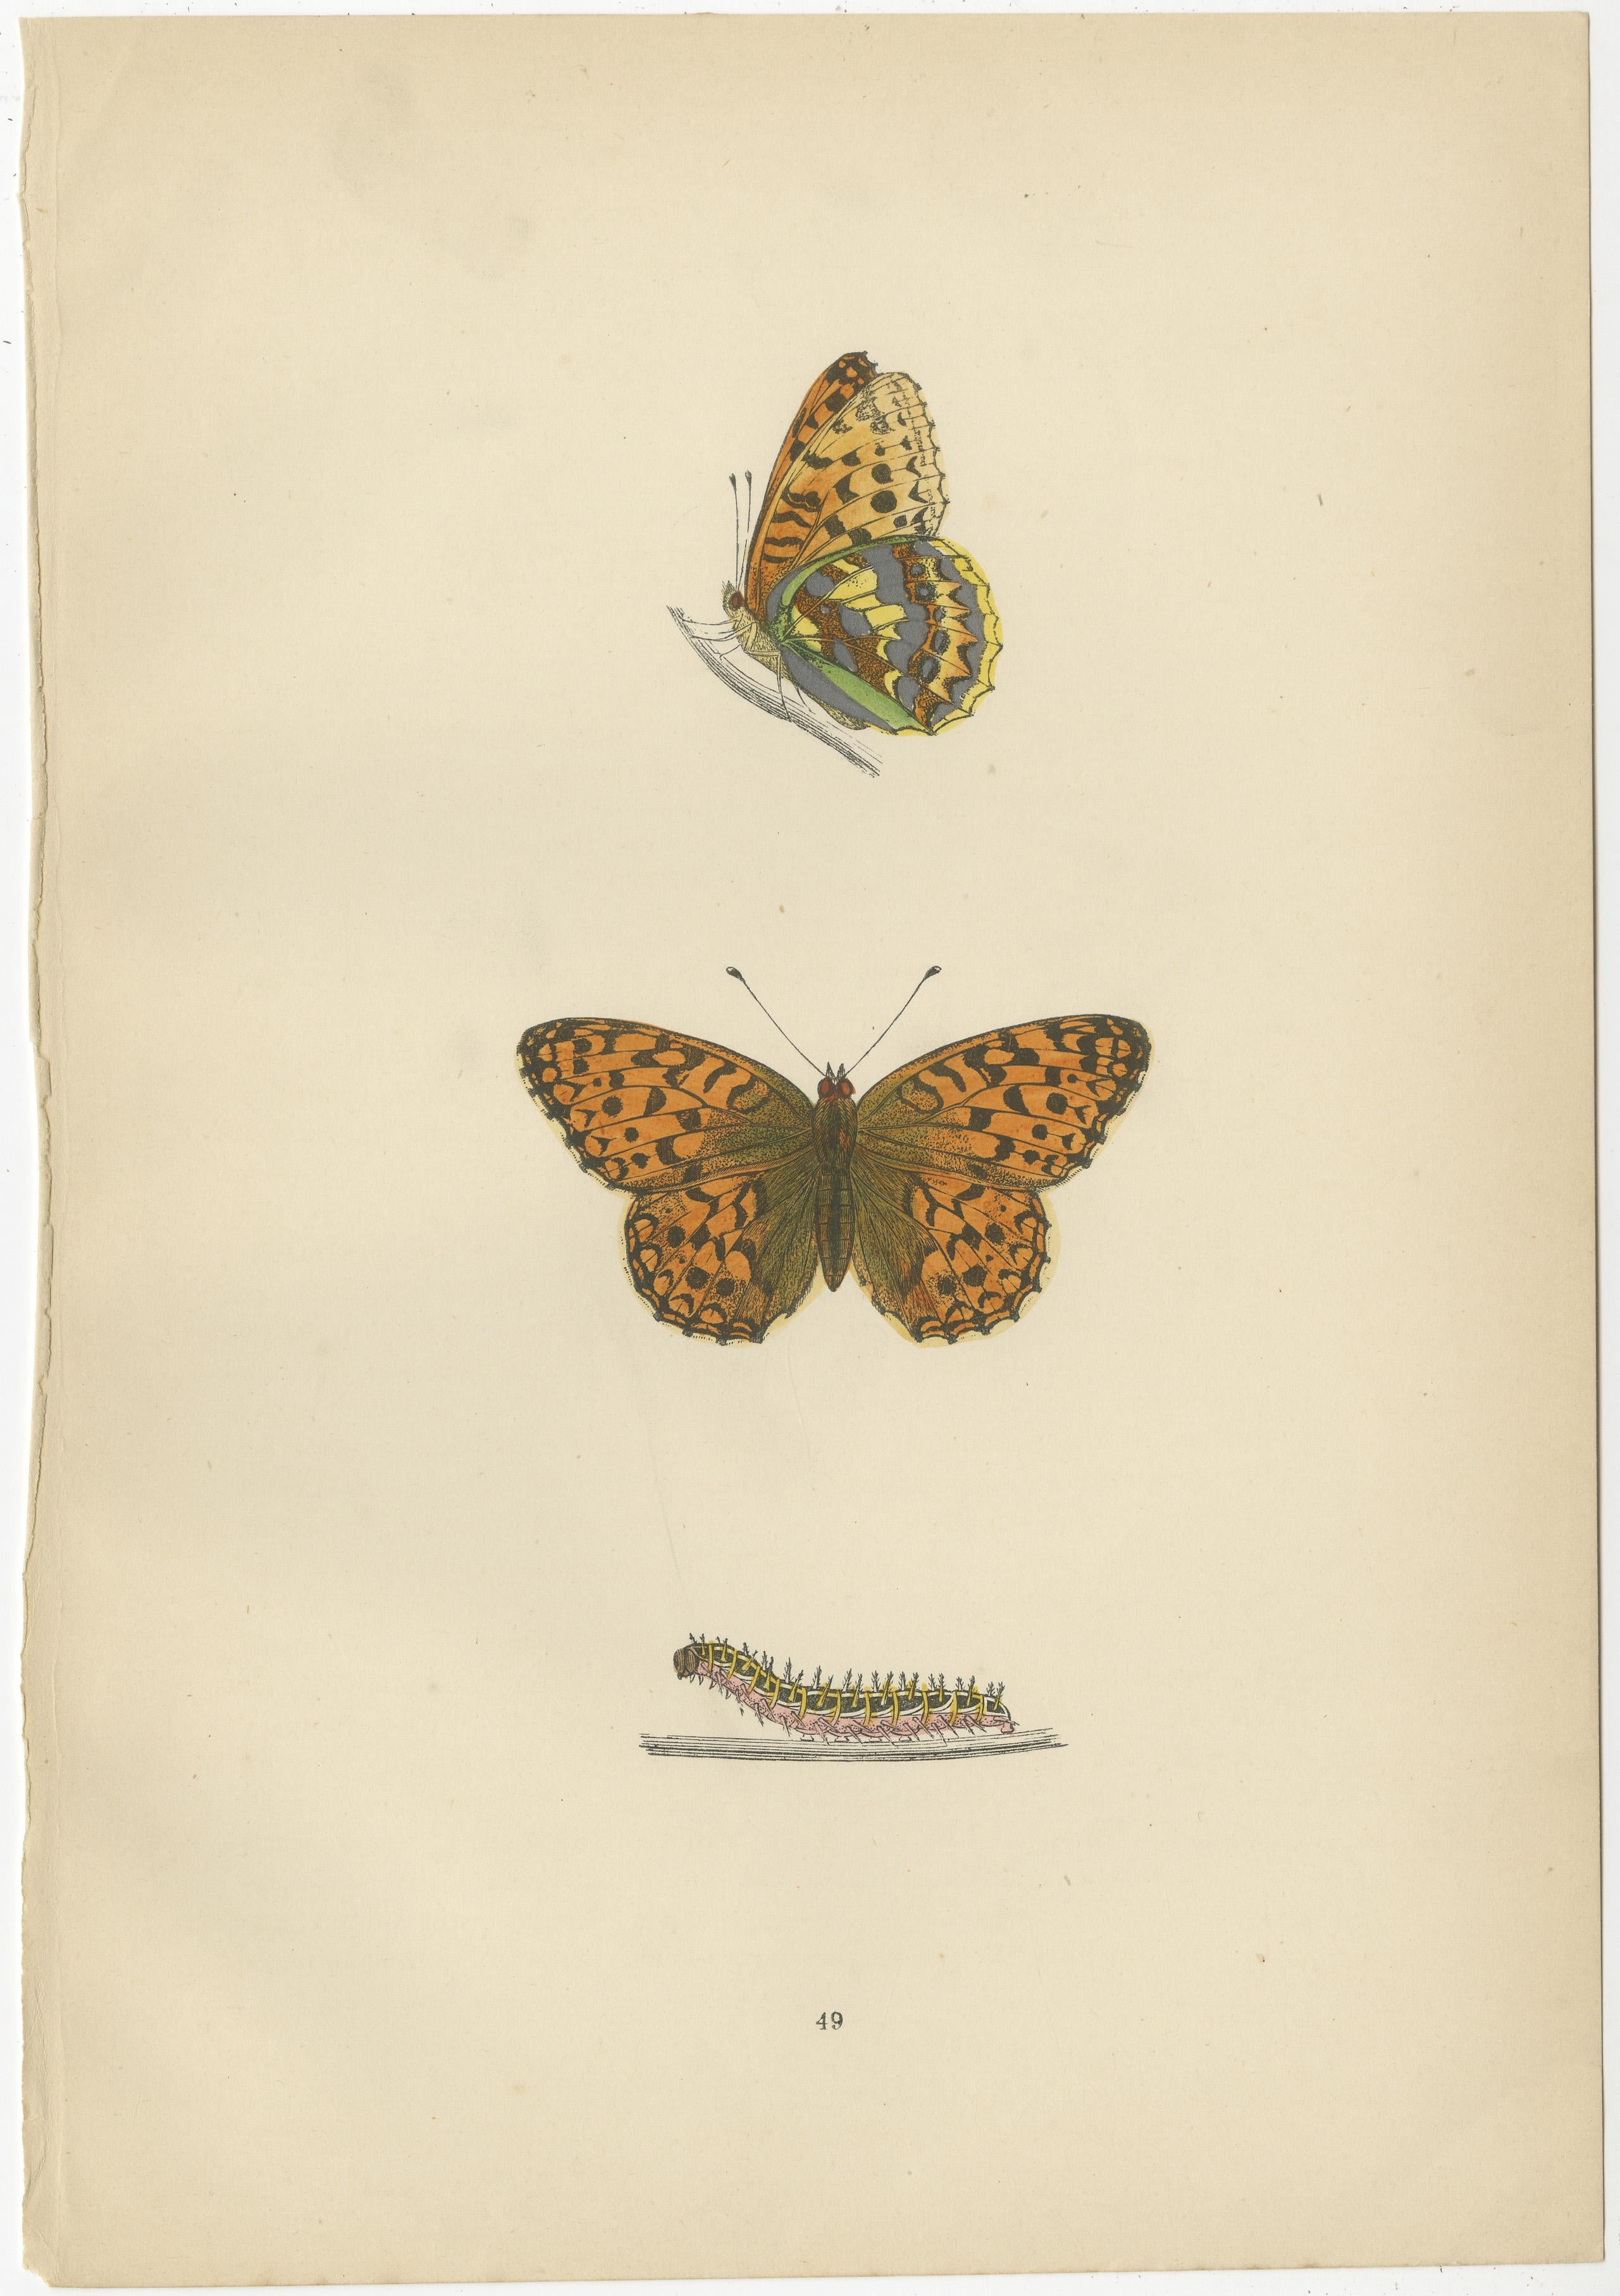 The butterflies depicted in the original antique plates are all hand-colored and they are part of the Fritillary family, known for their beautiful, checkered patterns.

1. **High-Brown Fritillary (Argynnis adippe)**: This butterfly has a wingspan